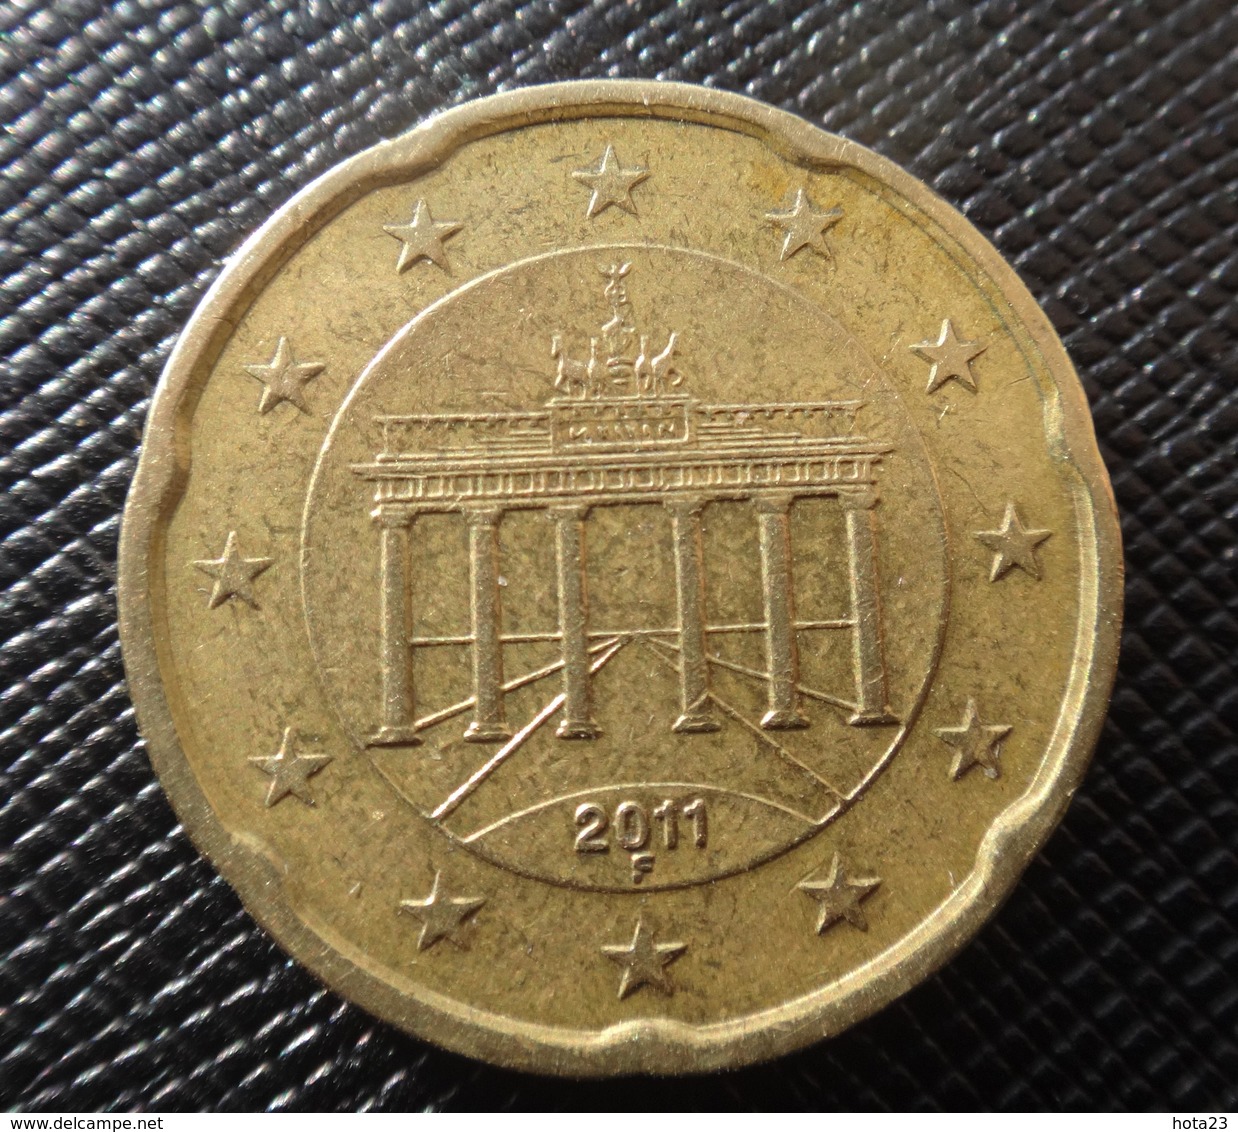 2011  ~~  F ~~ Germany  20  EURO CENT  EIRO CIRCULEET COIN  ALLEMAGNE - Germany